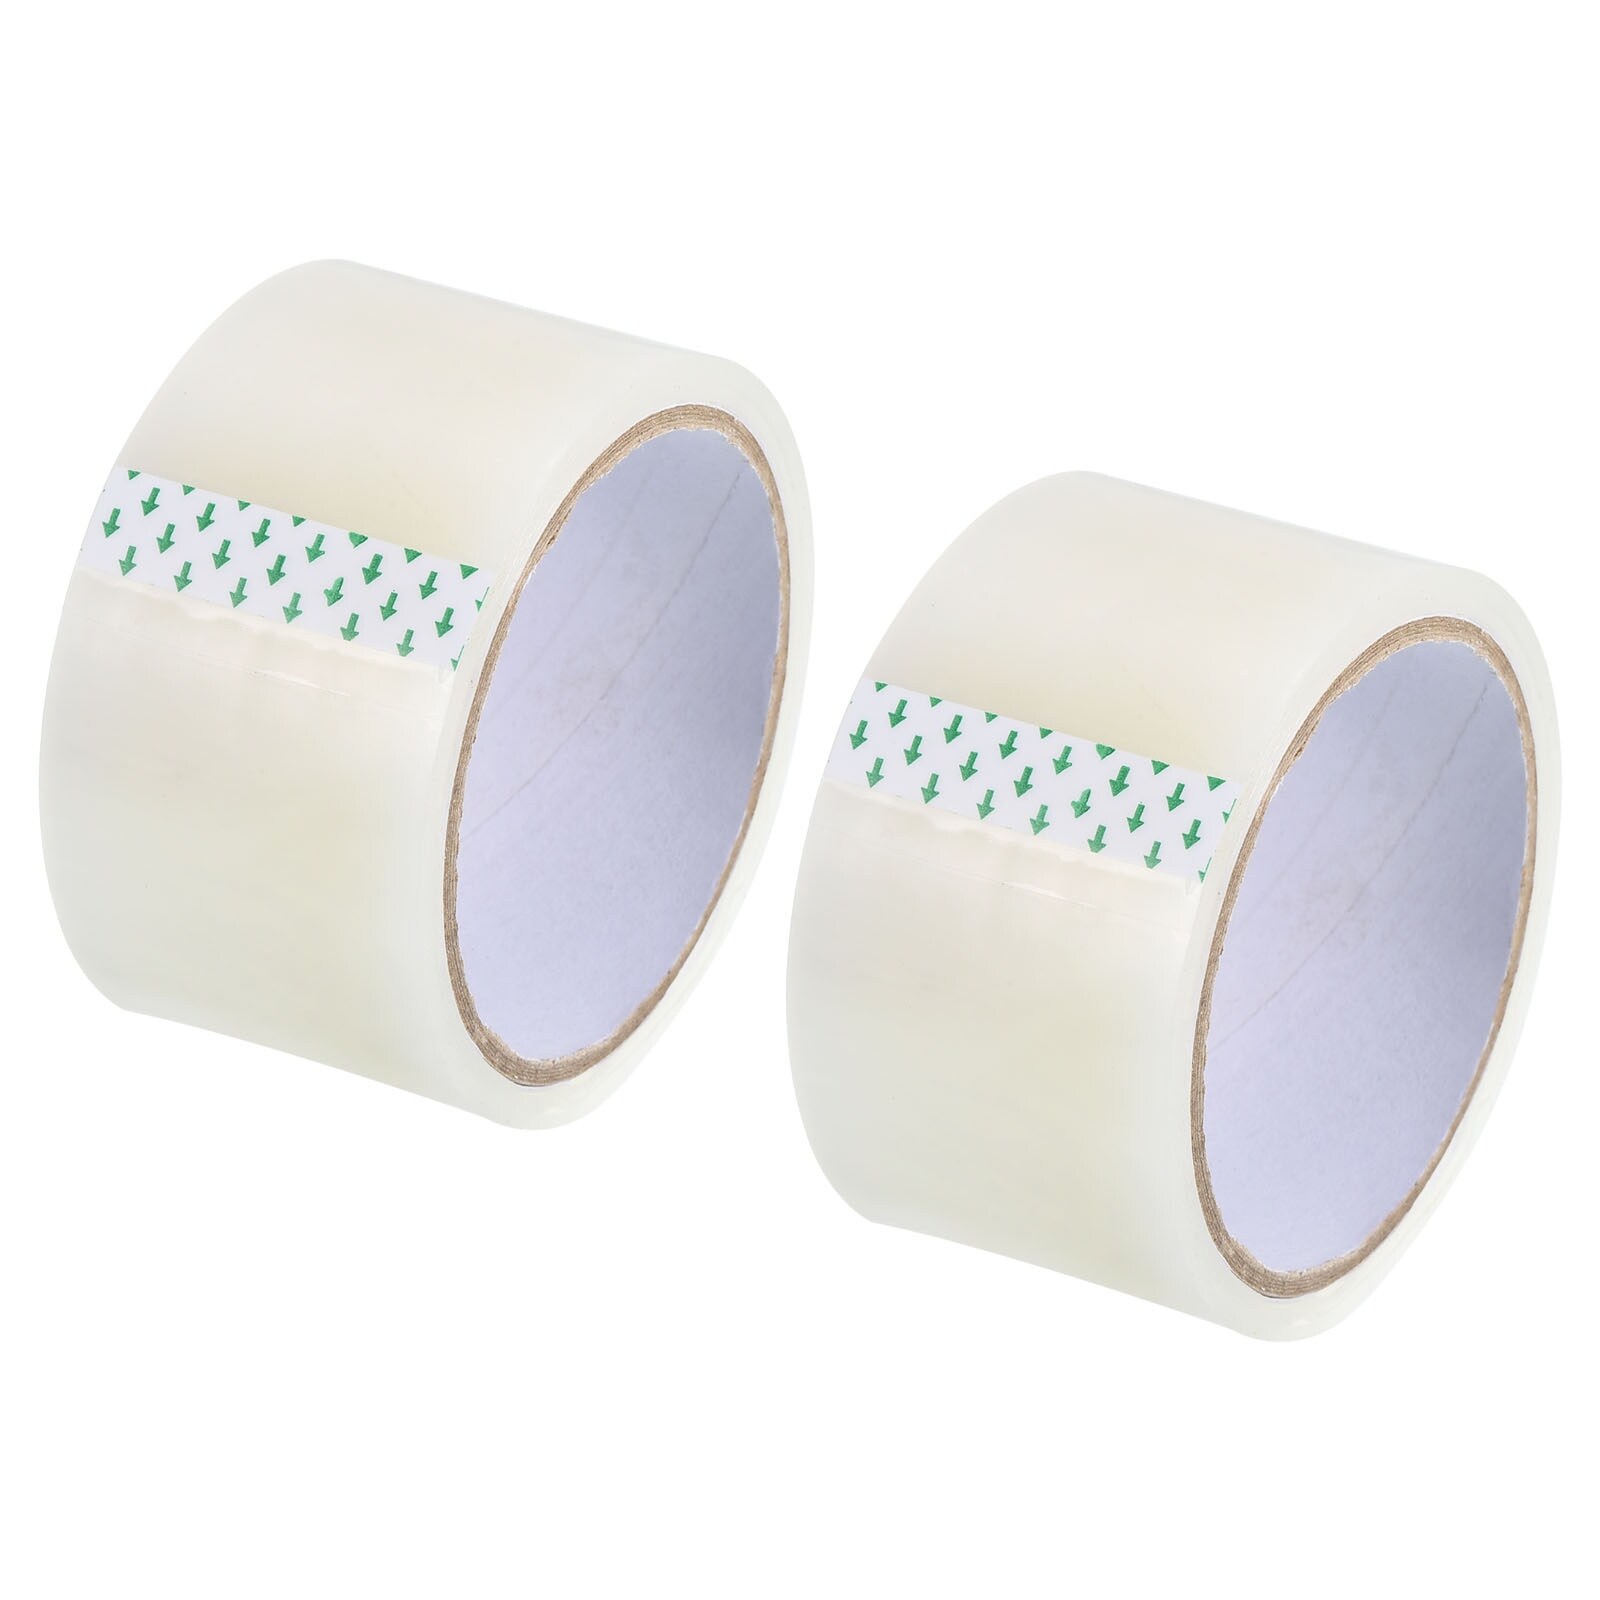 Greenhouse Plastic Tape, Poly Patching Tape